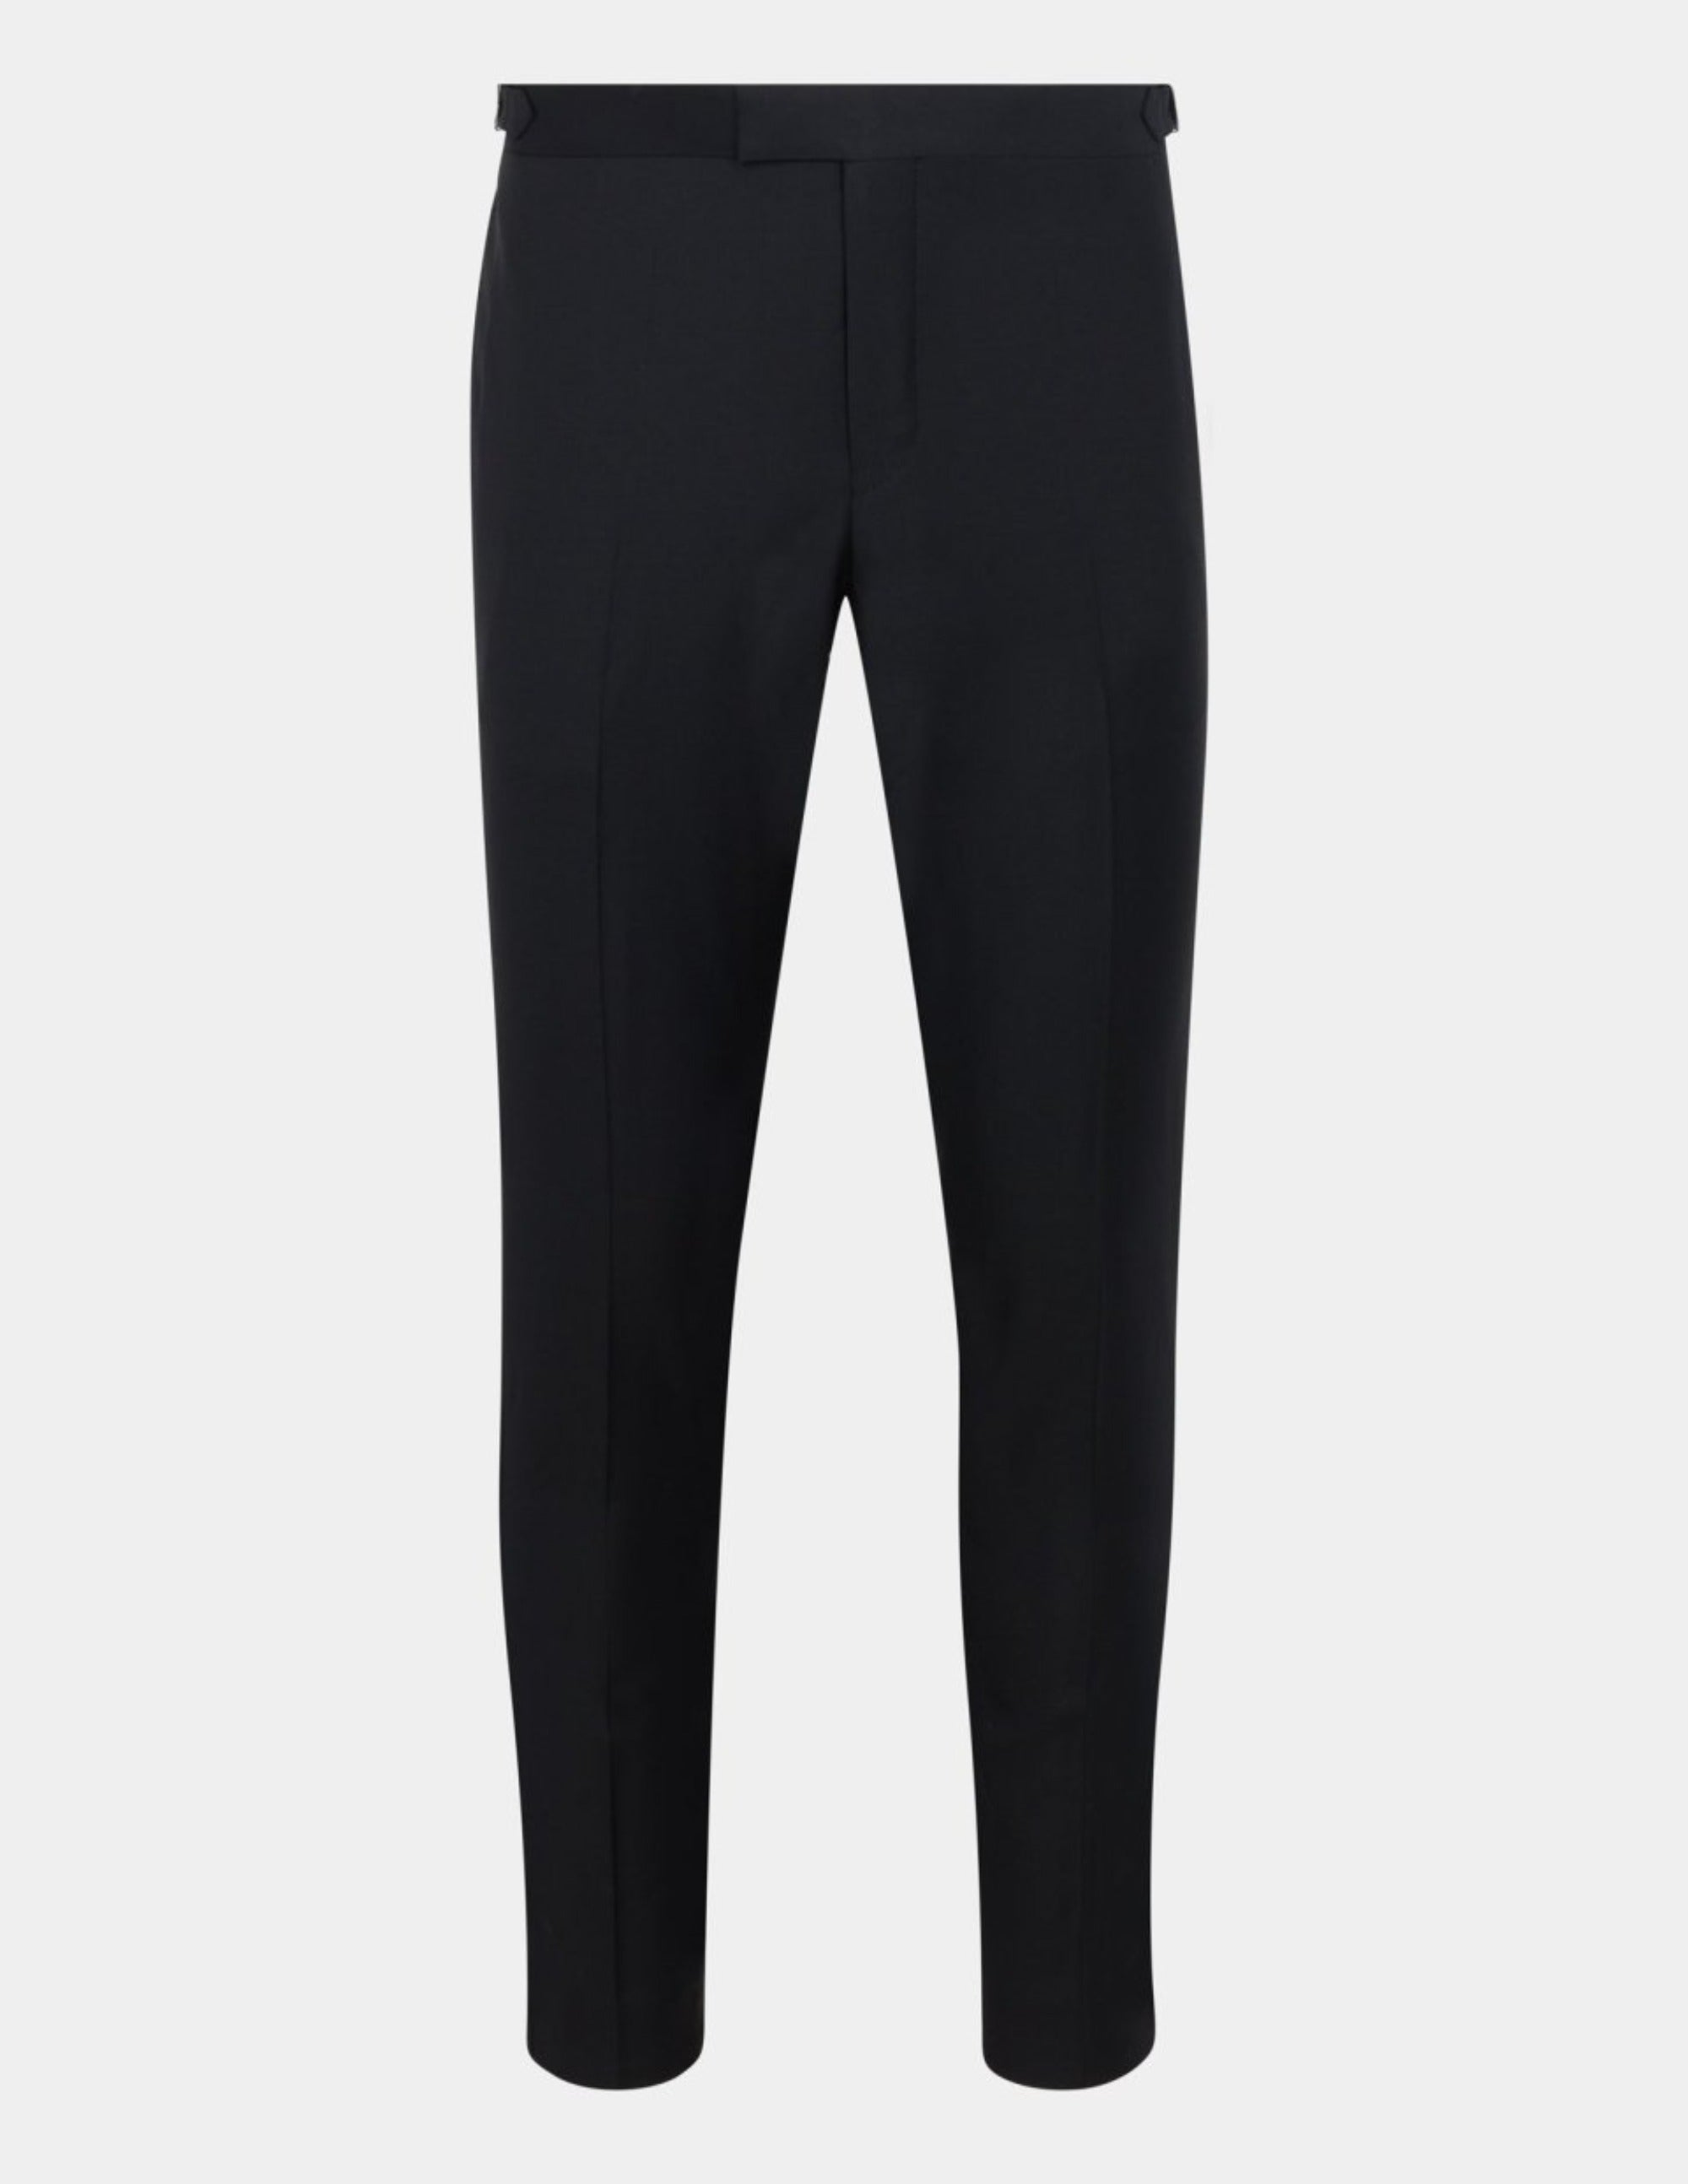 Casual trousers Tom Ford - Black wool blend tuxedo trousers -  PAW235FAX375LB999